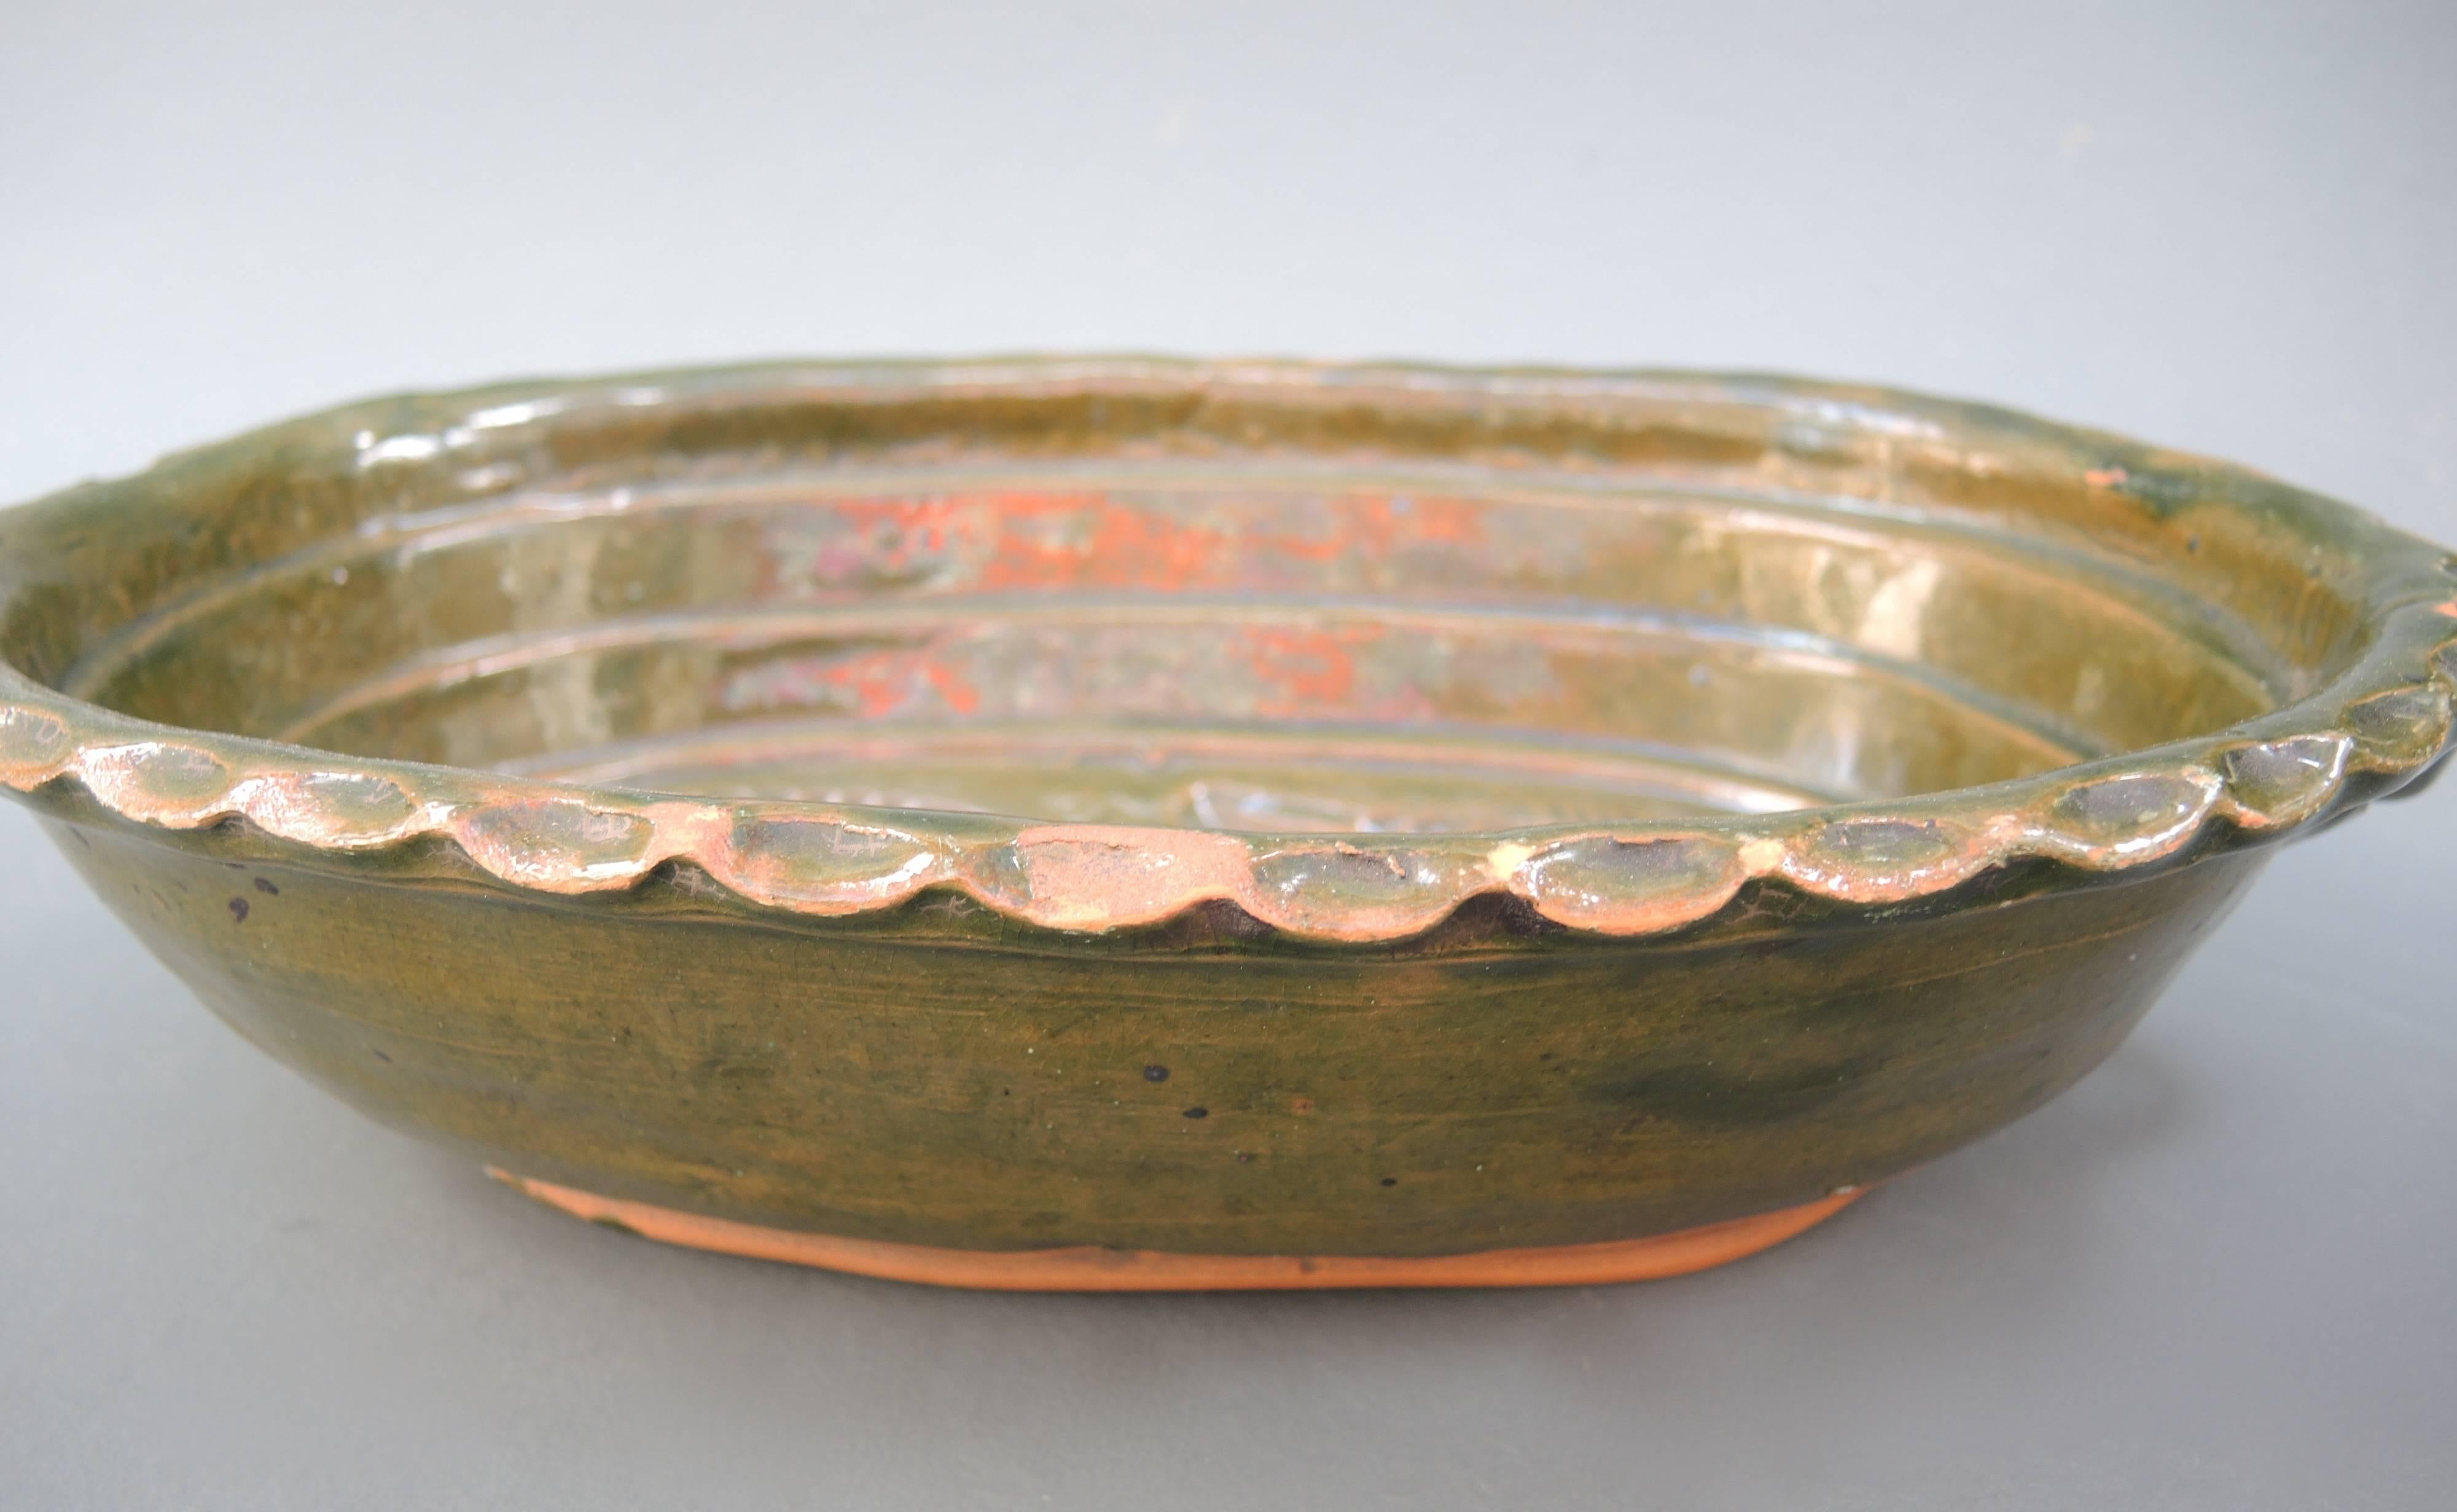 This mid-19th century French glazed terracotta baking dish is made with an impressed double fish design so that when the cake is removed the pair of fish appear as a raised design on the surface. Also used to make chilled mousse and gelatins.
 